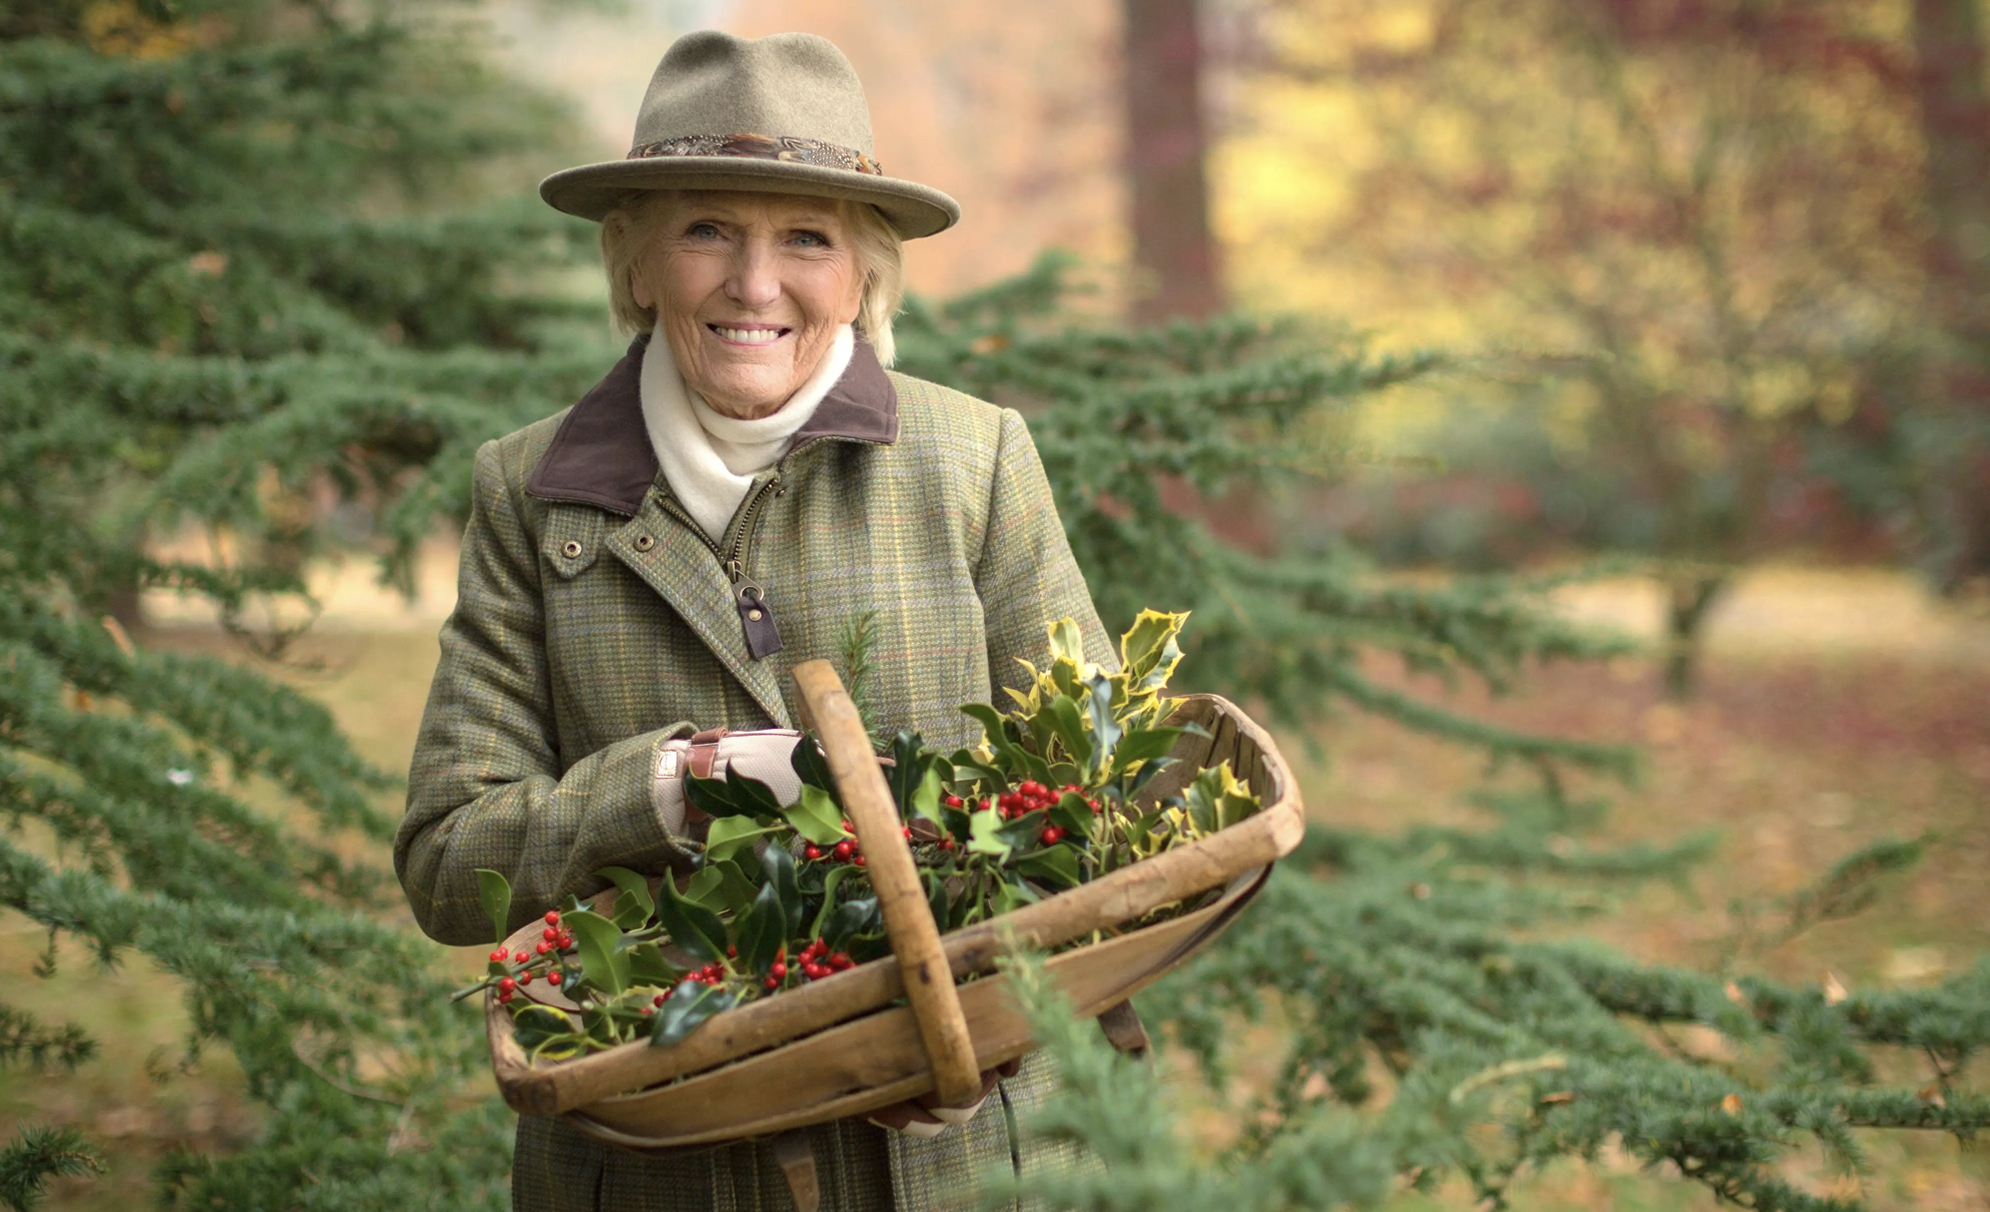 British cook Mary Berry holding a basket of holly